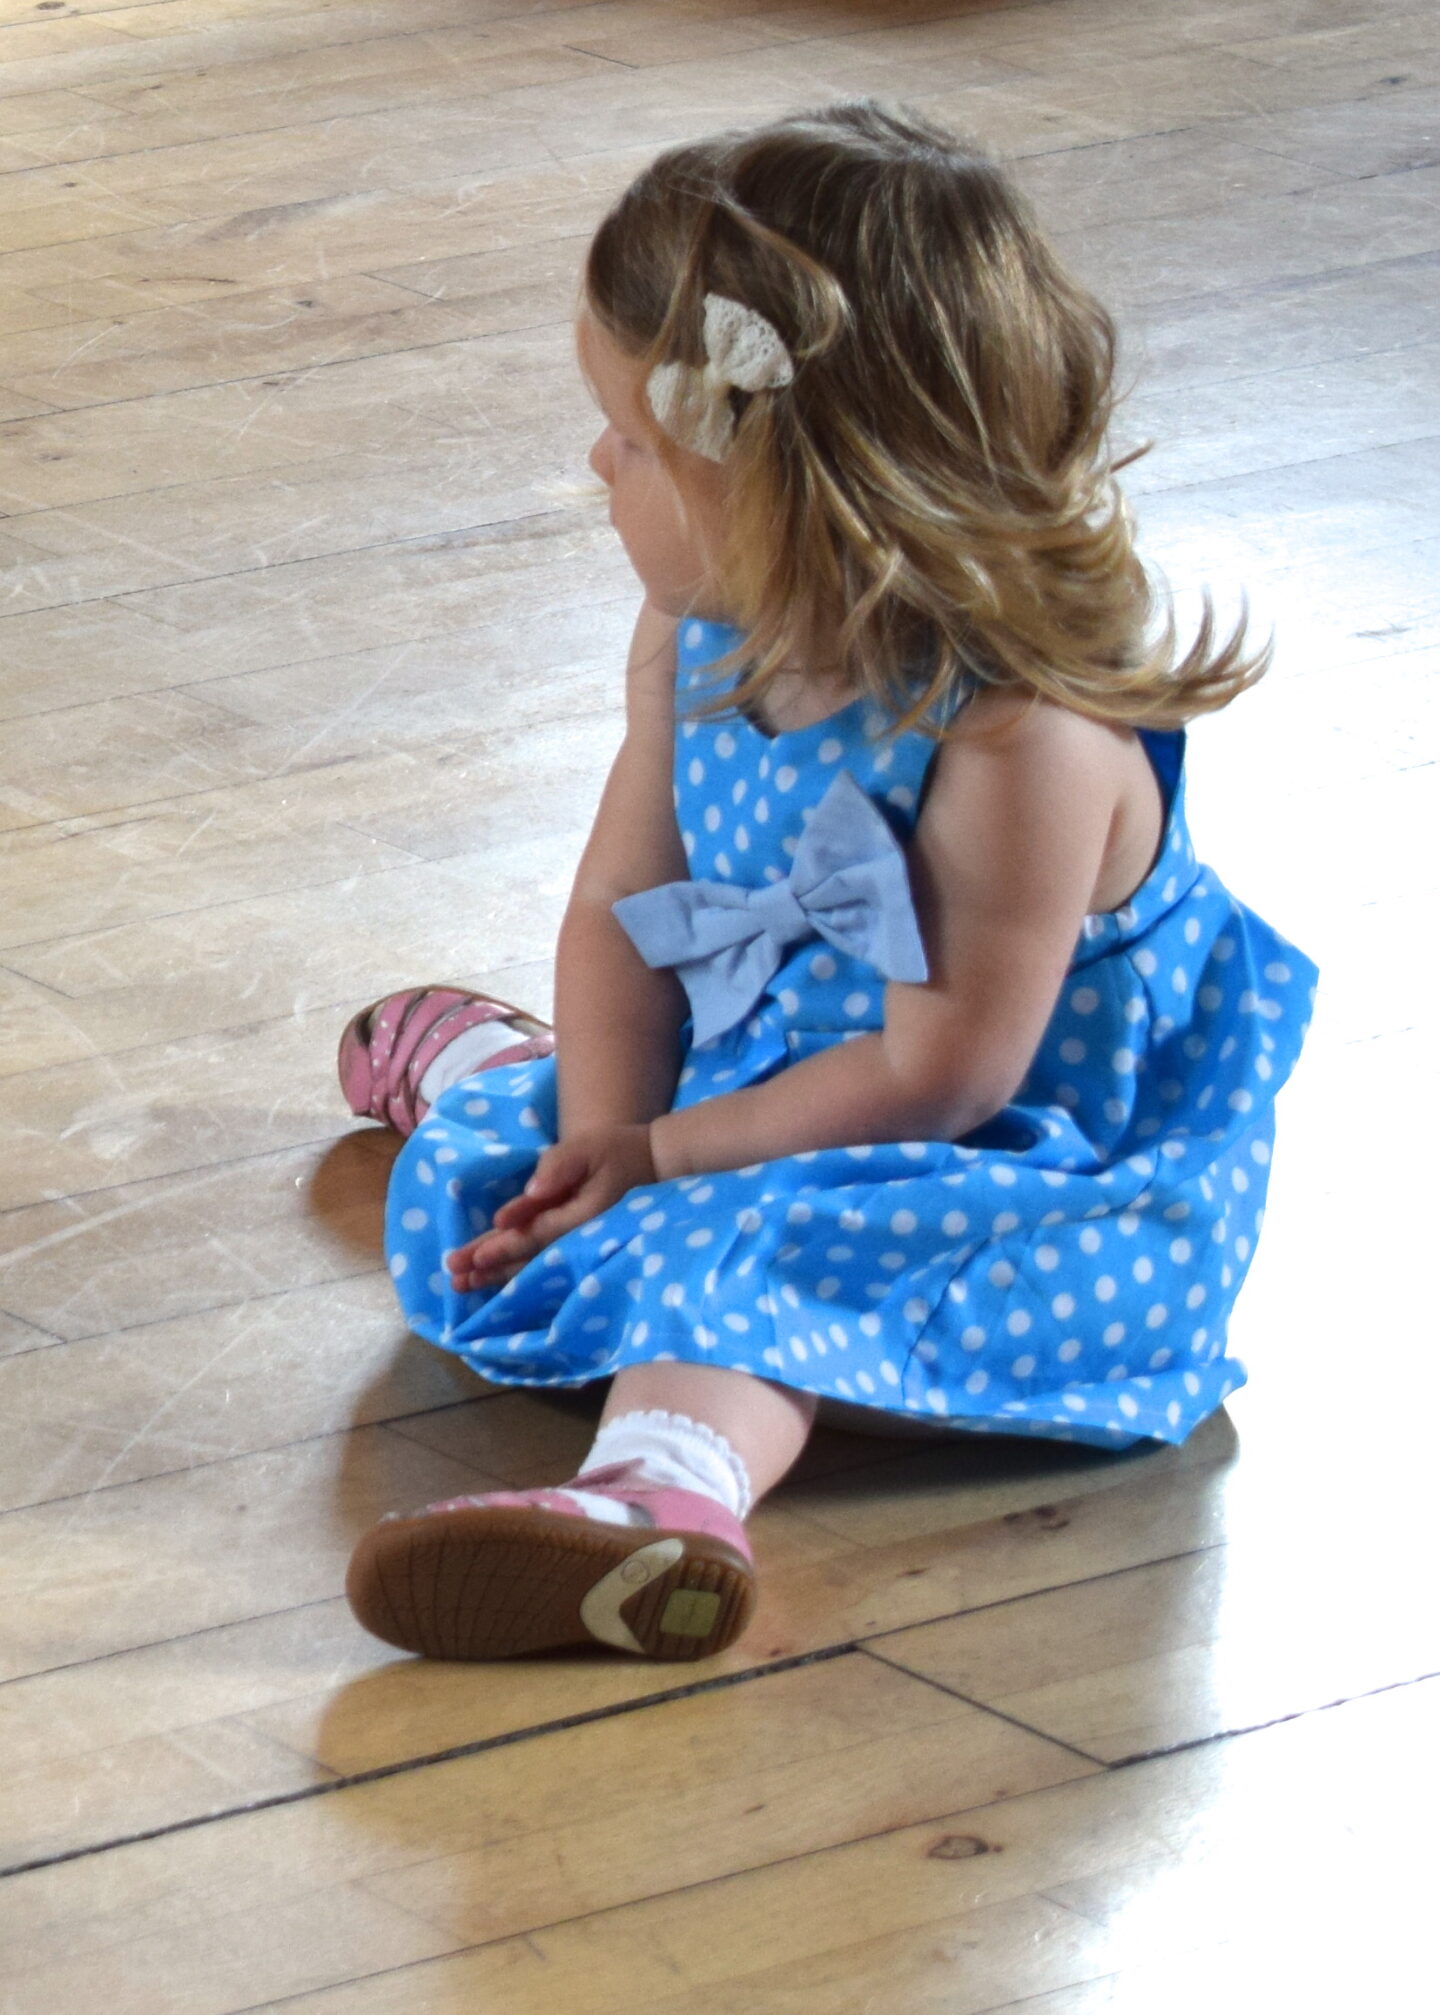 A party dress from The Princess and the Frock